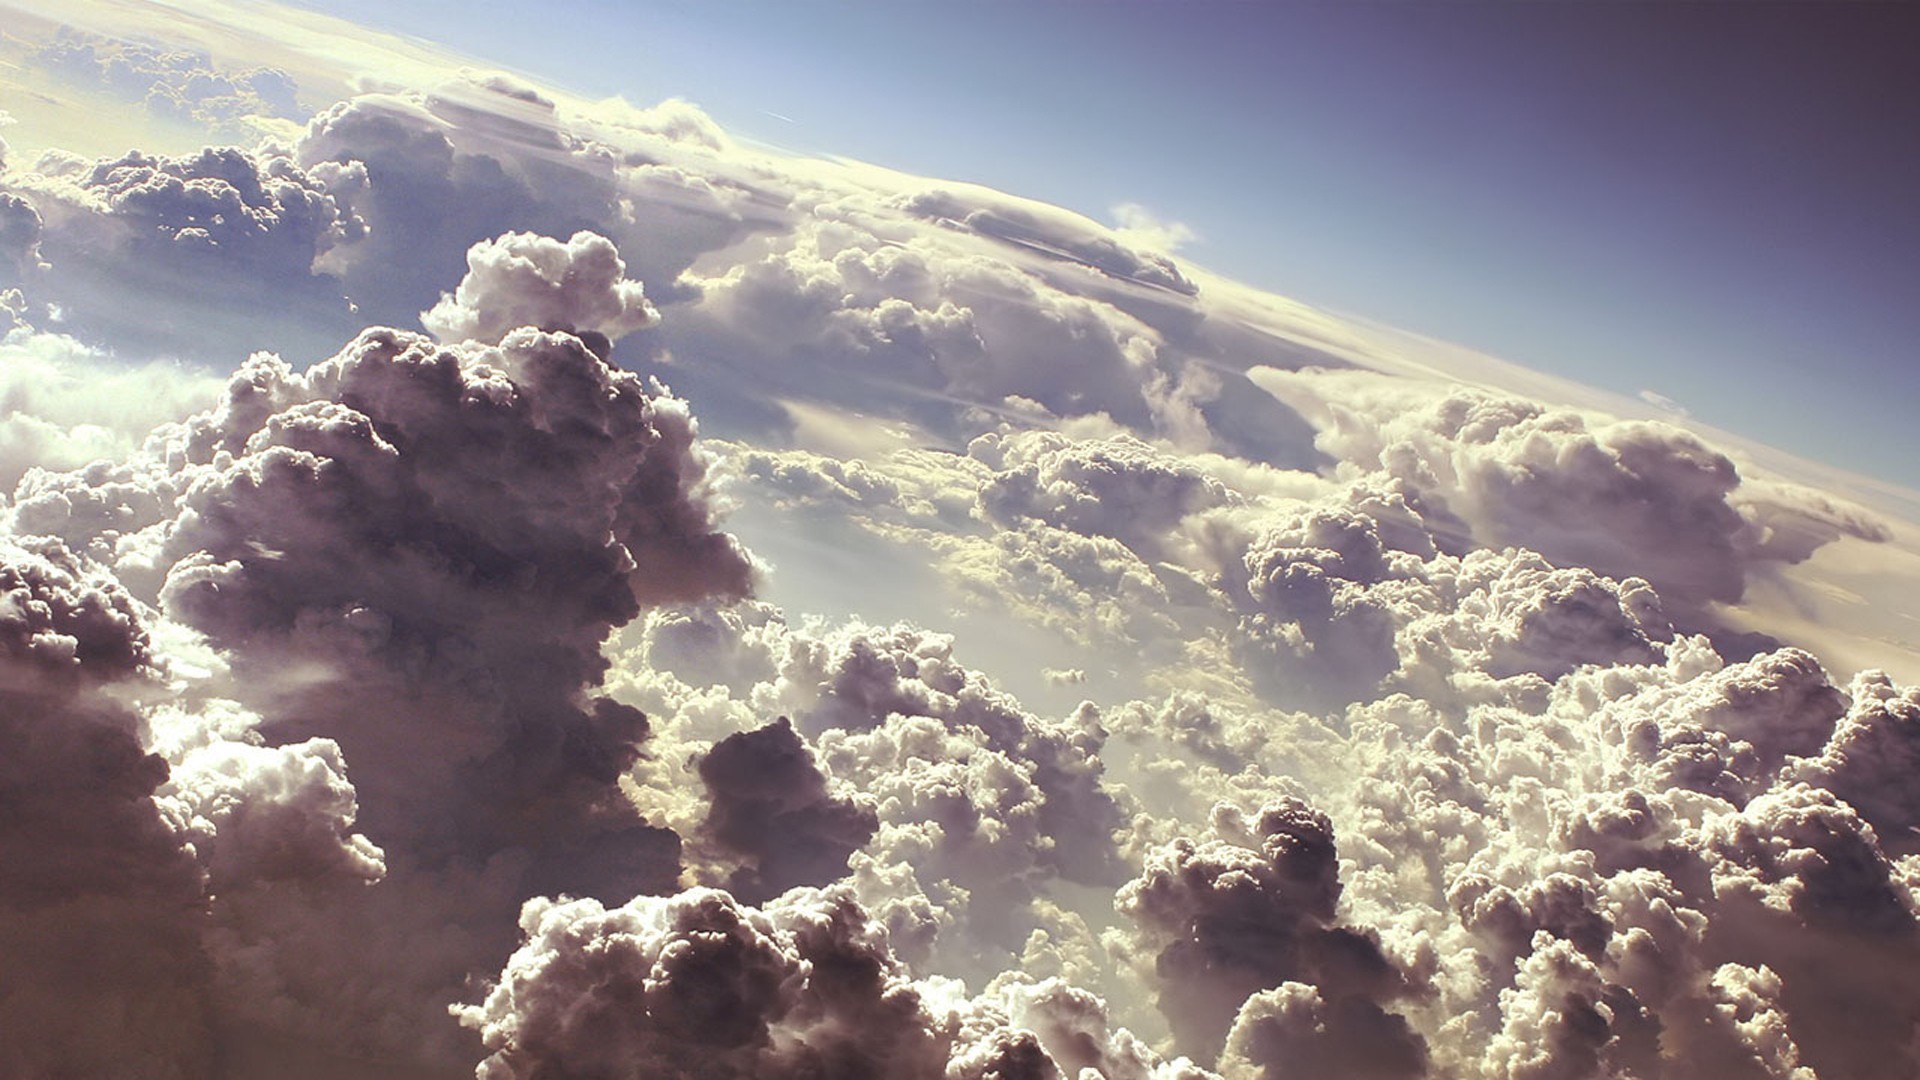 1920x1080 Download Cloud Background Images HD Wallpaper of Nature .